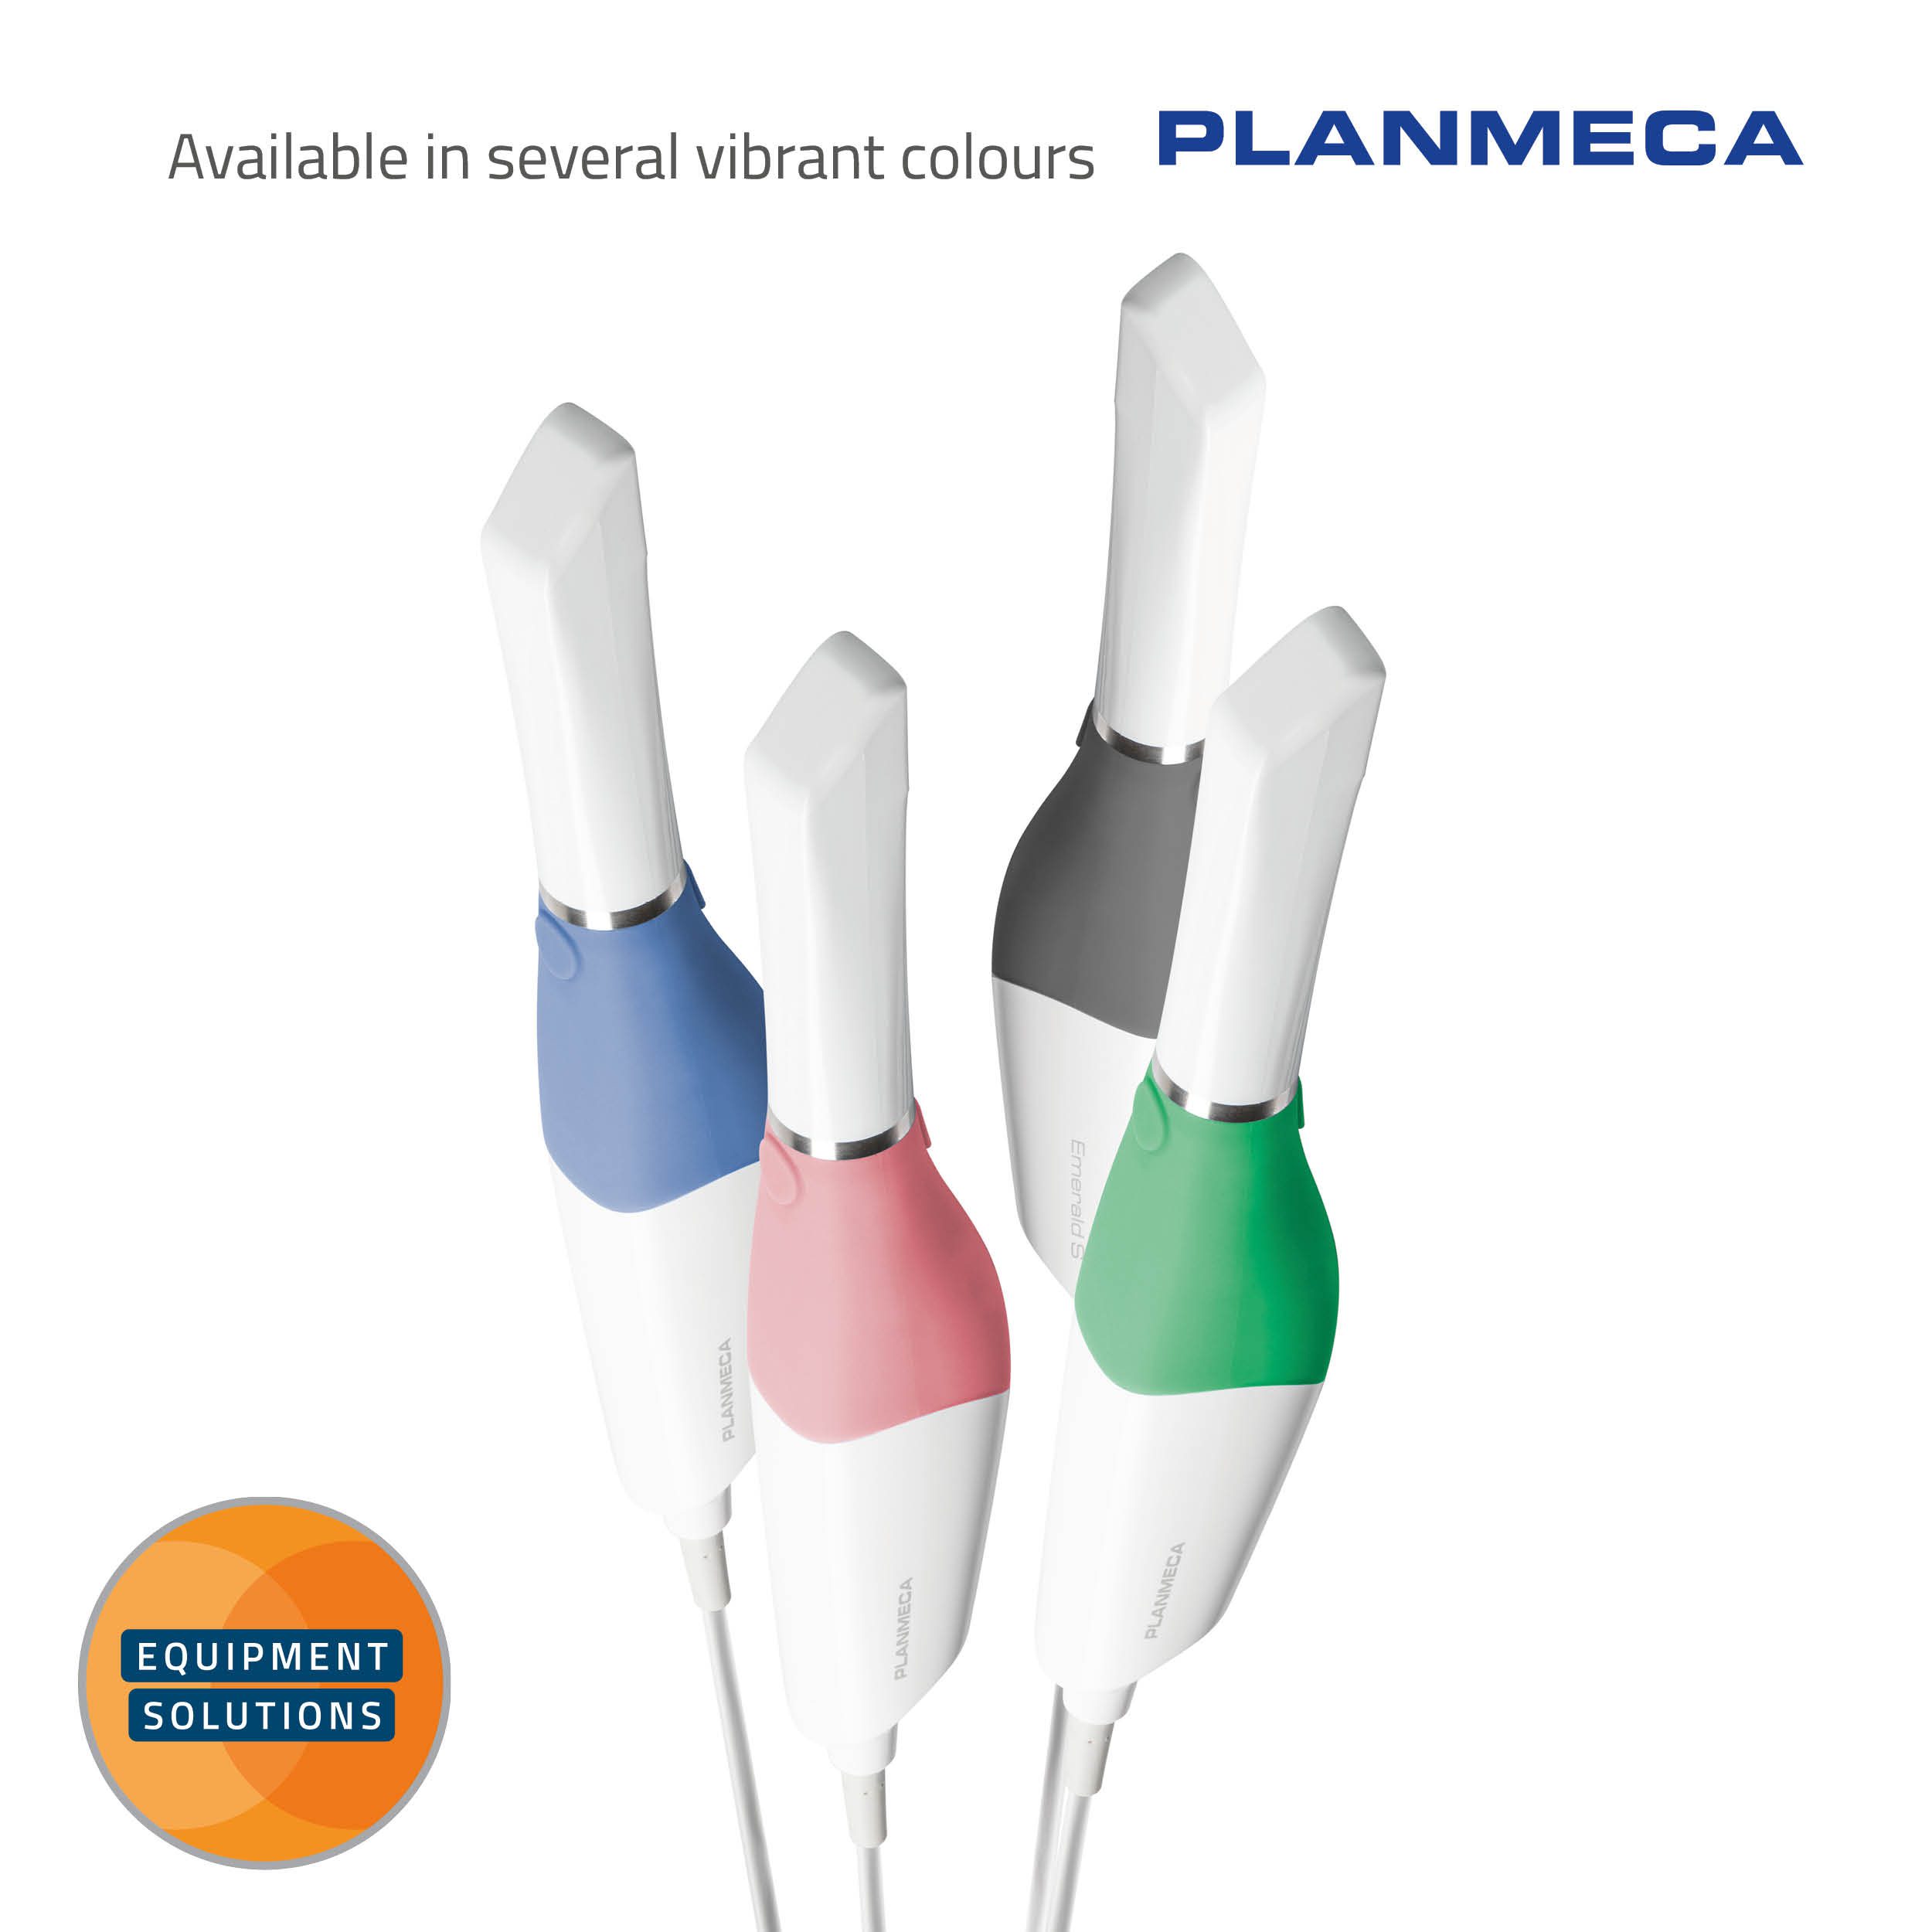 Planmeca Emerald S Intraoral Scanner is a lightweight, compact unit